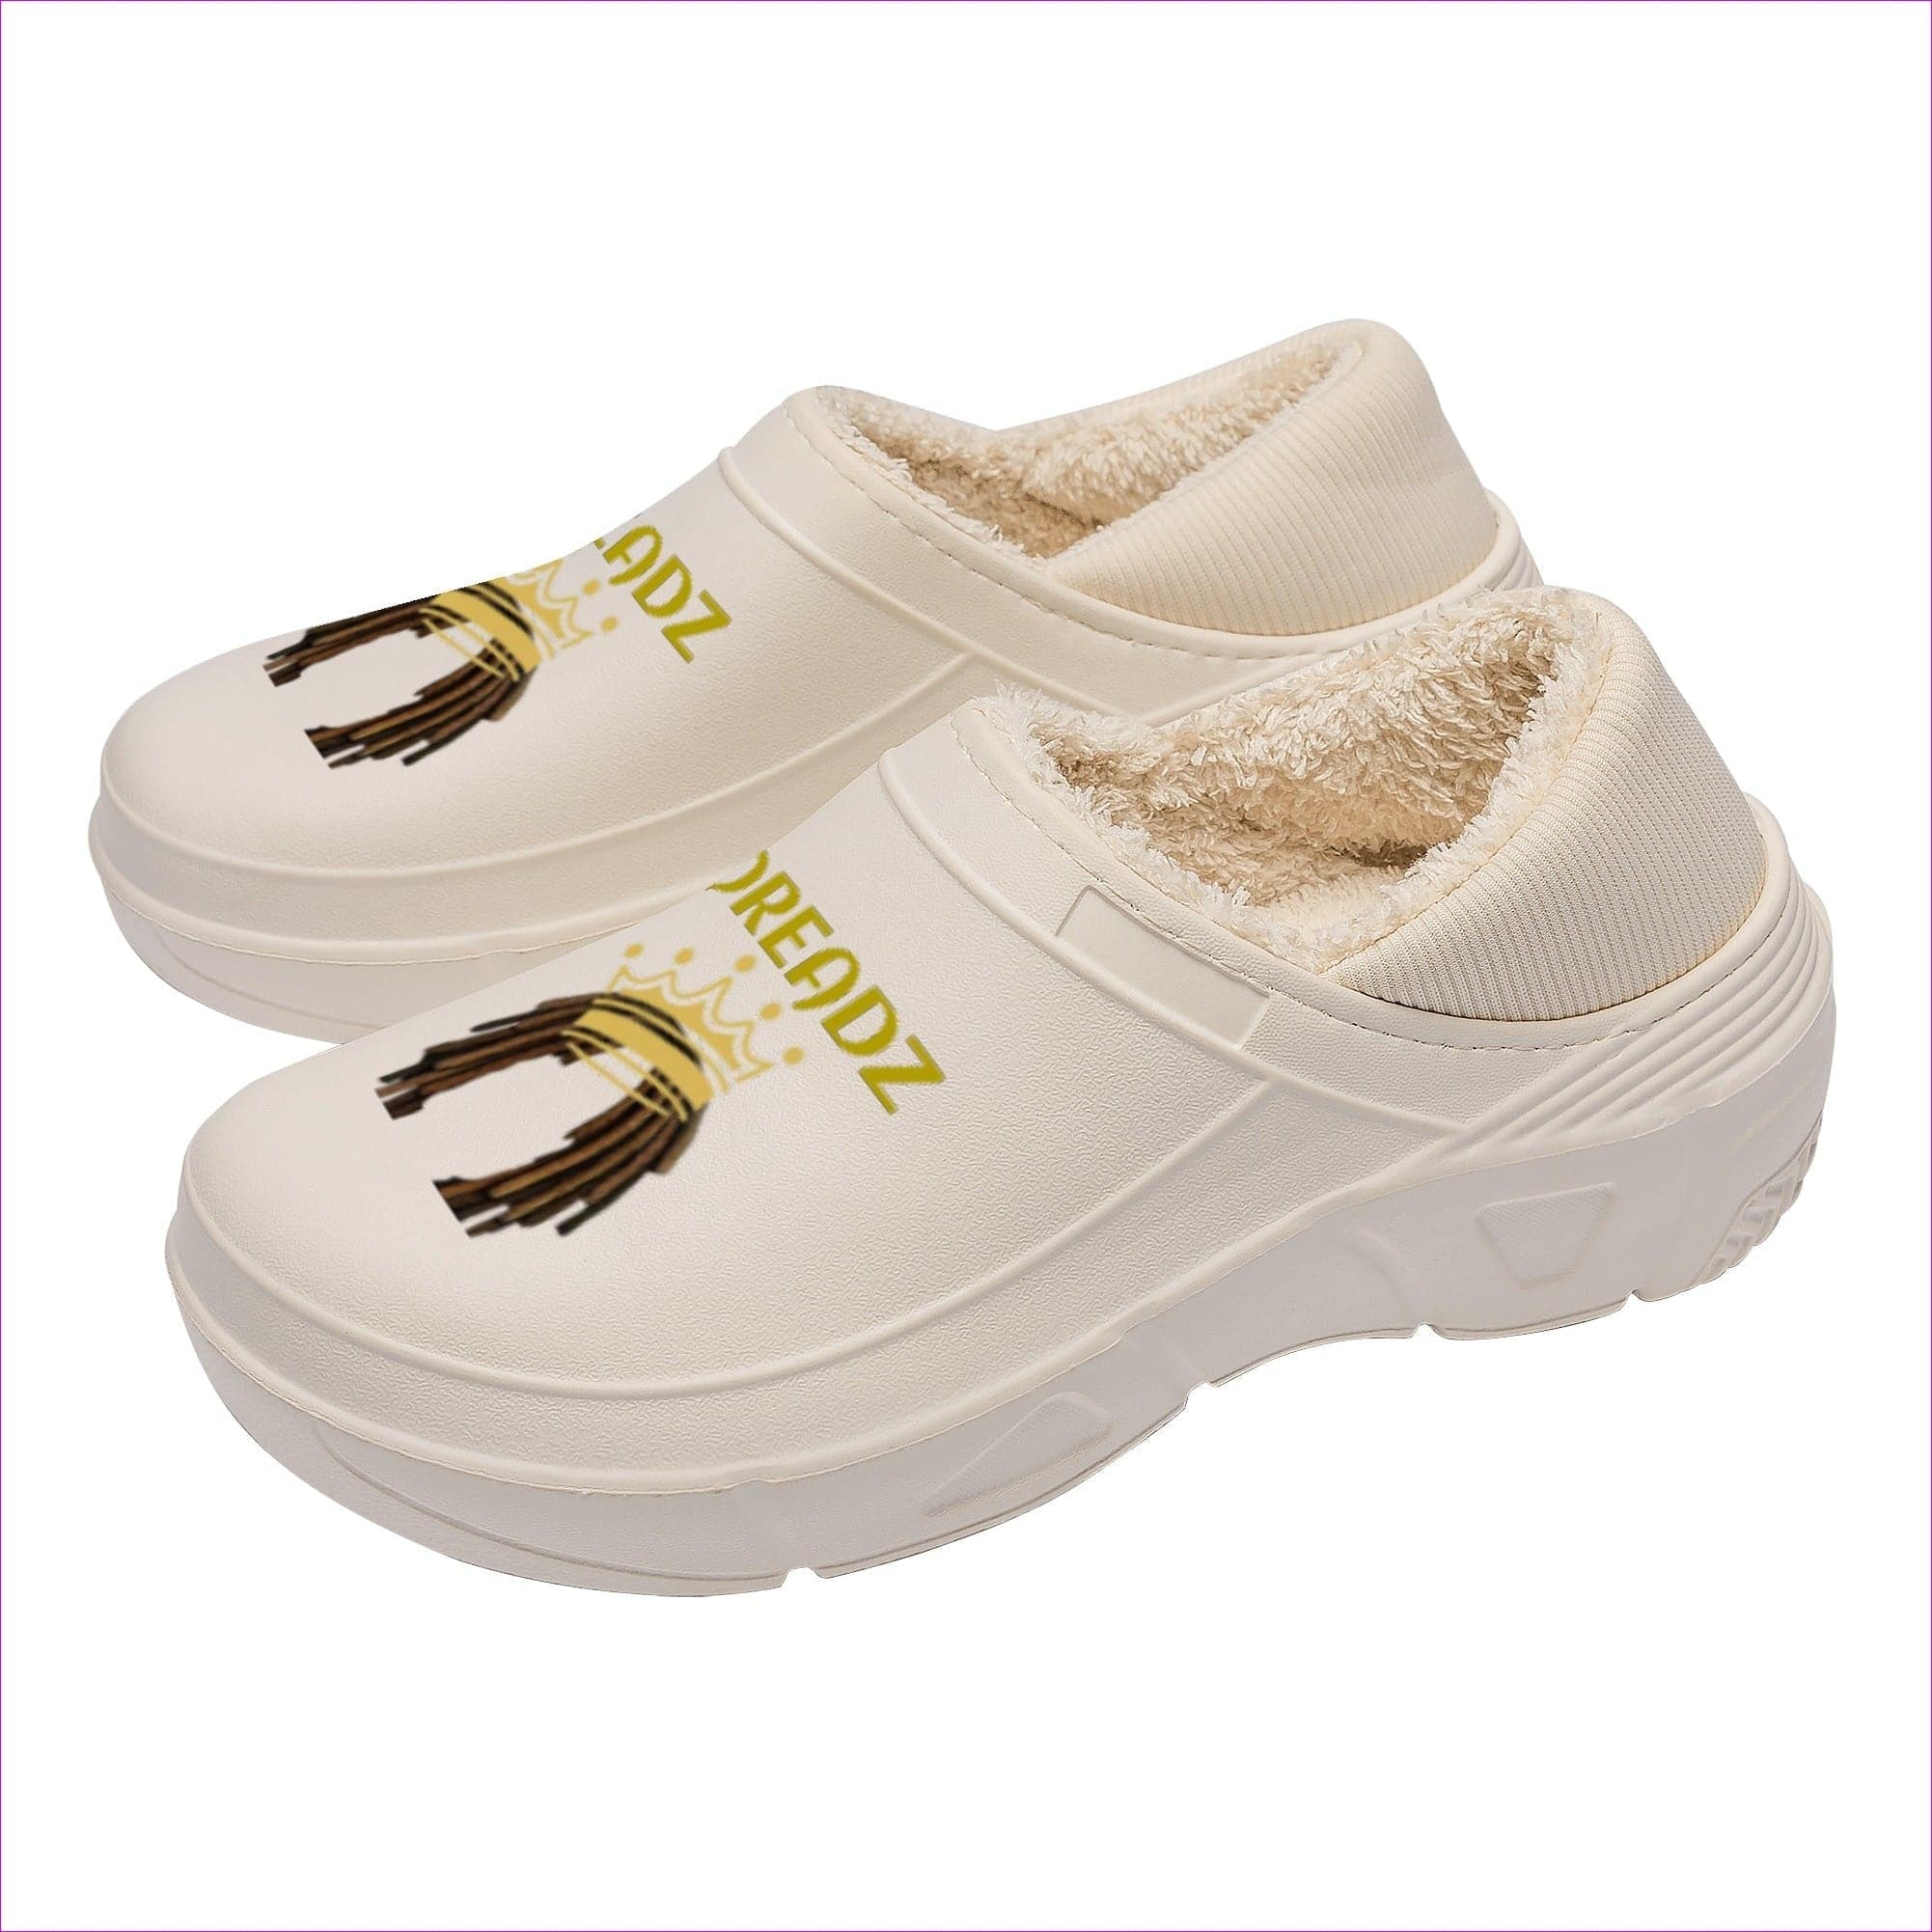 - Crowned Dreadz Men's Warm Cotton Slippers - mens slippers at TFC&H Co.